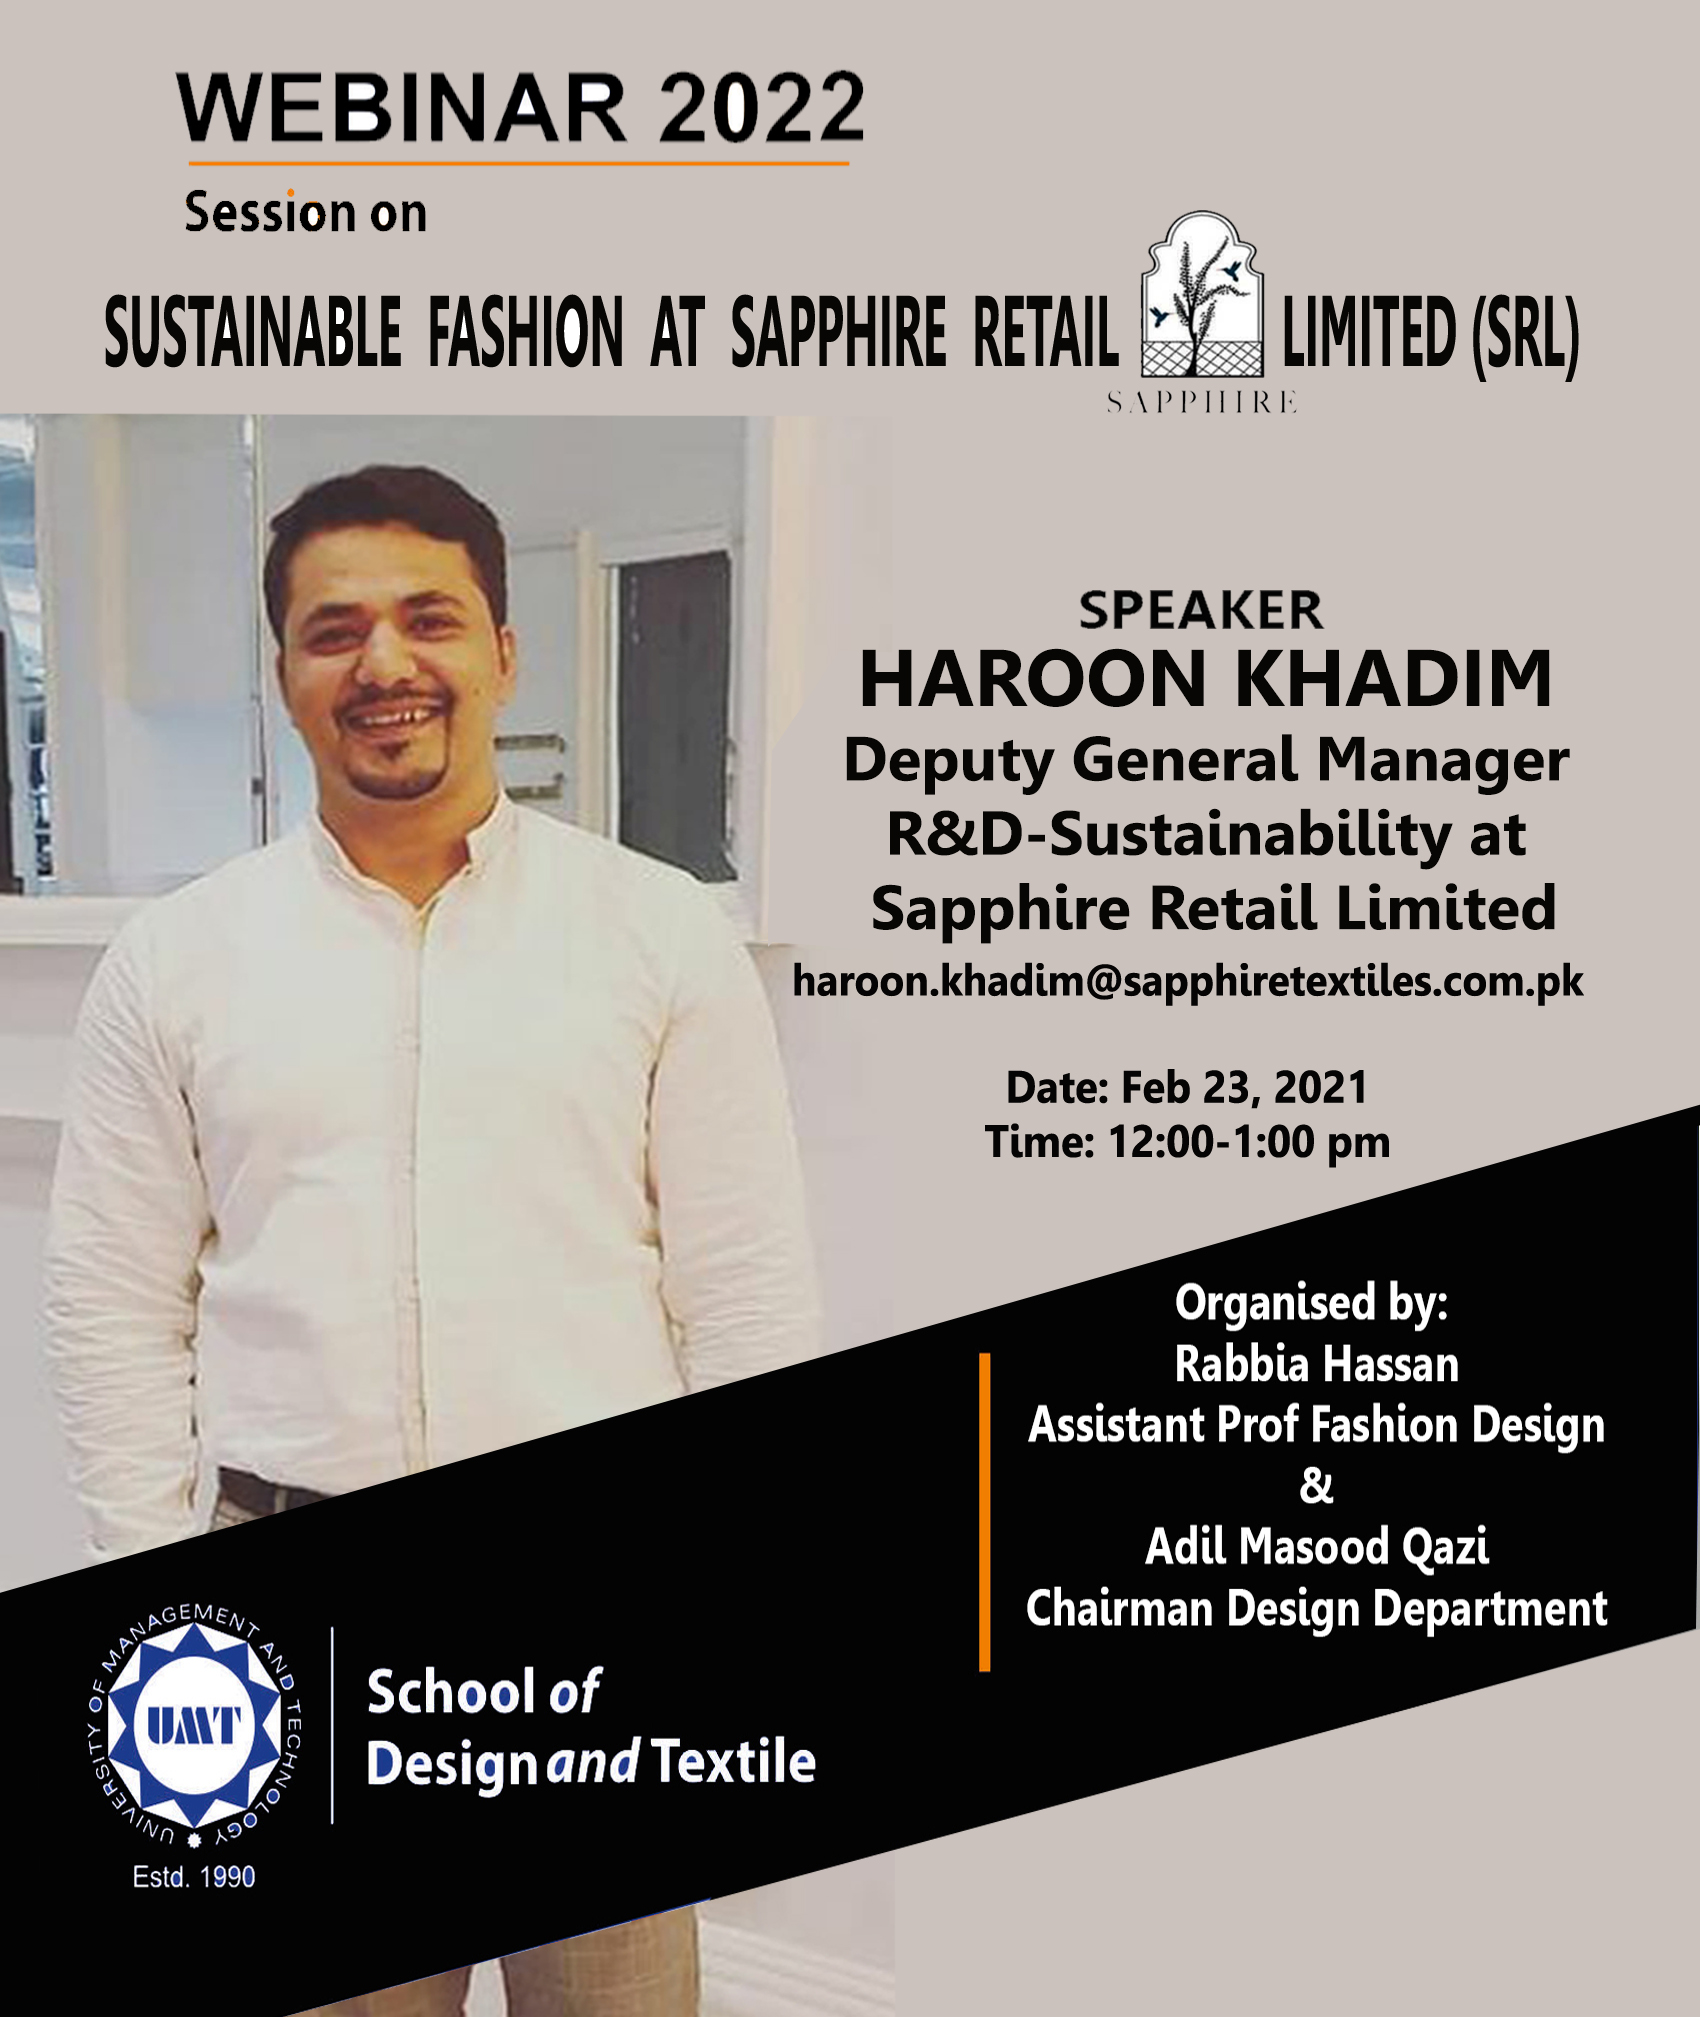 Webinar on Sustainable Fashion at Sapphire Retail Limited (SRL)